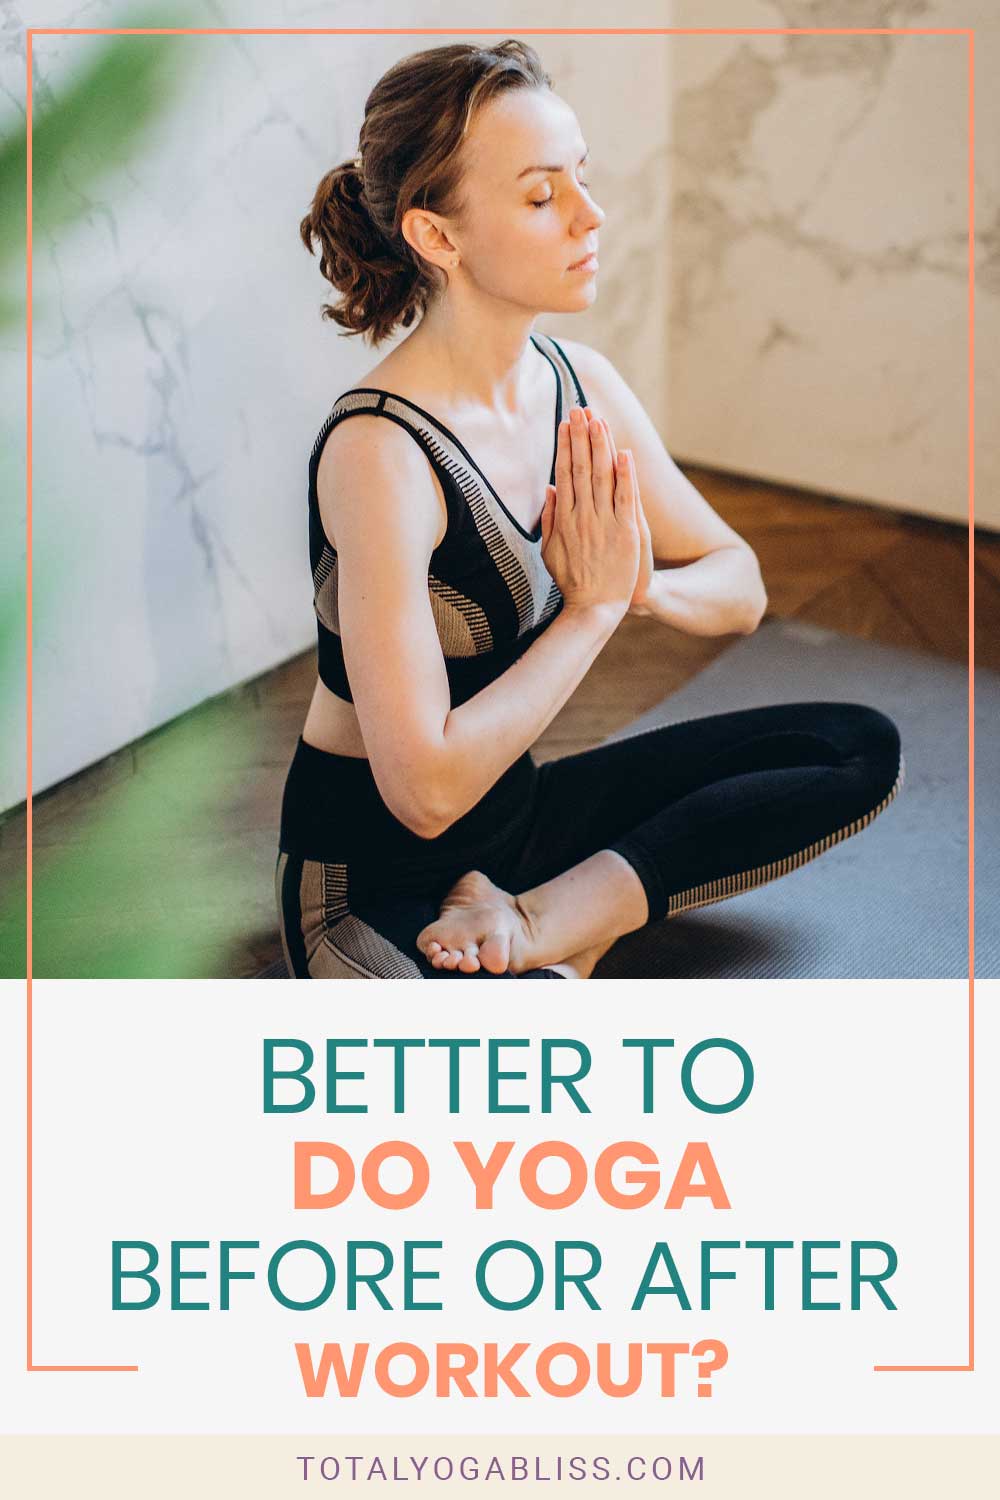 Better To Do Yoga Before Or After Workout?